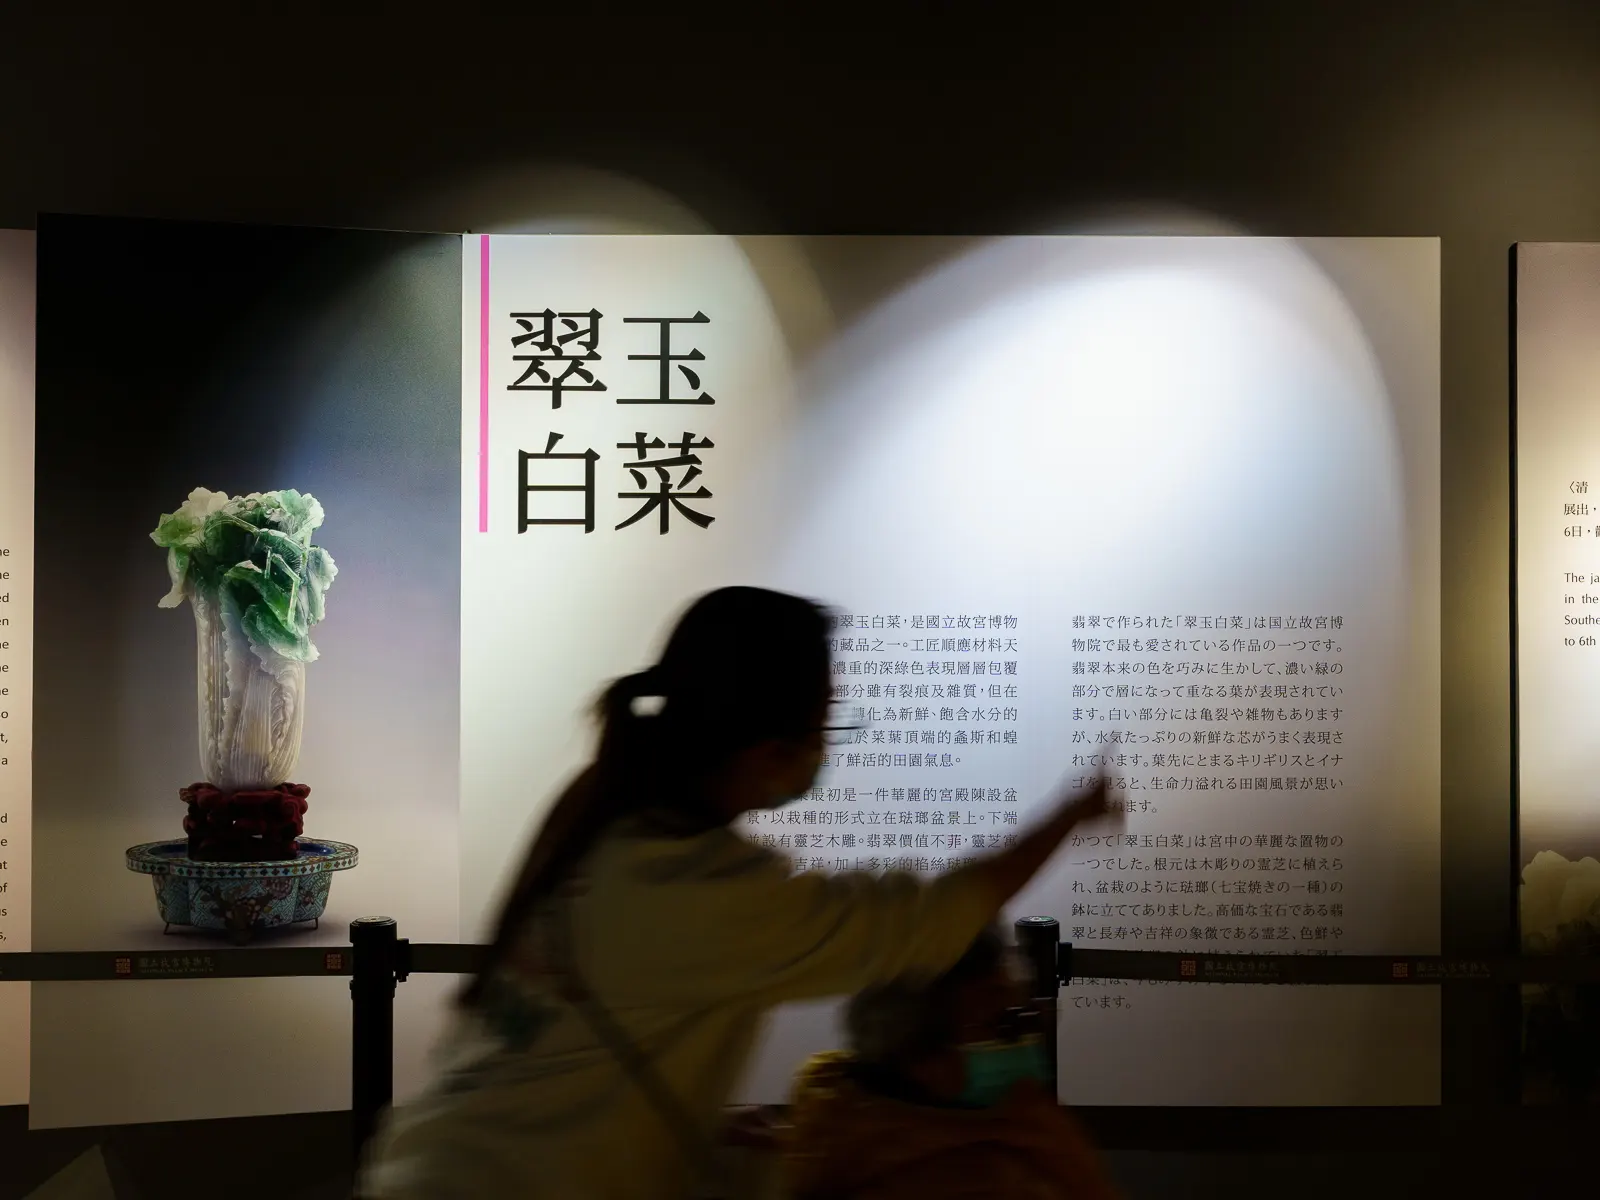 A backdrop depicts one of the museum's most famous displays, the Jade Cabbage.